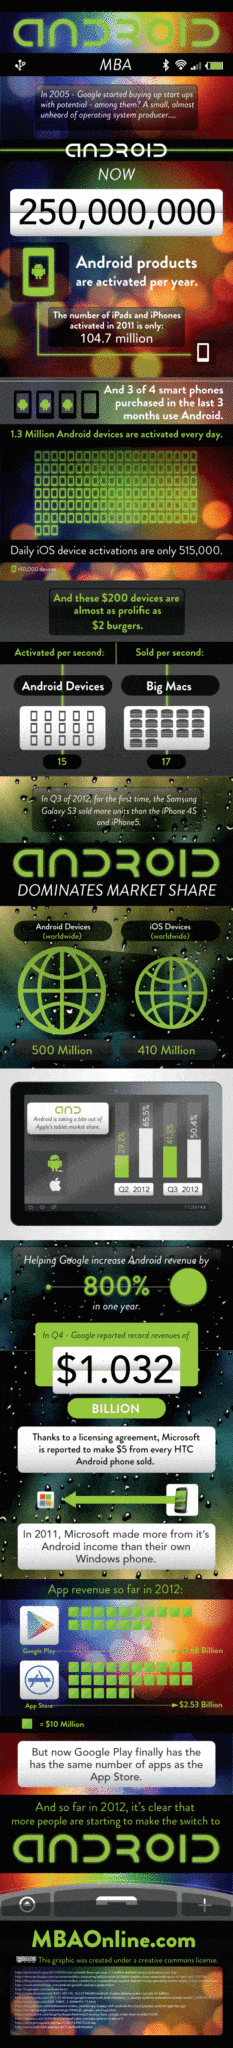 ANDROID-MBA ios comparaison